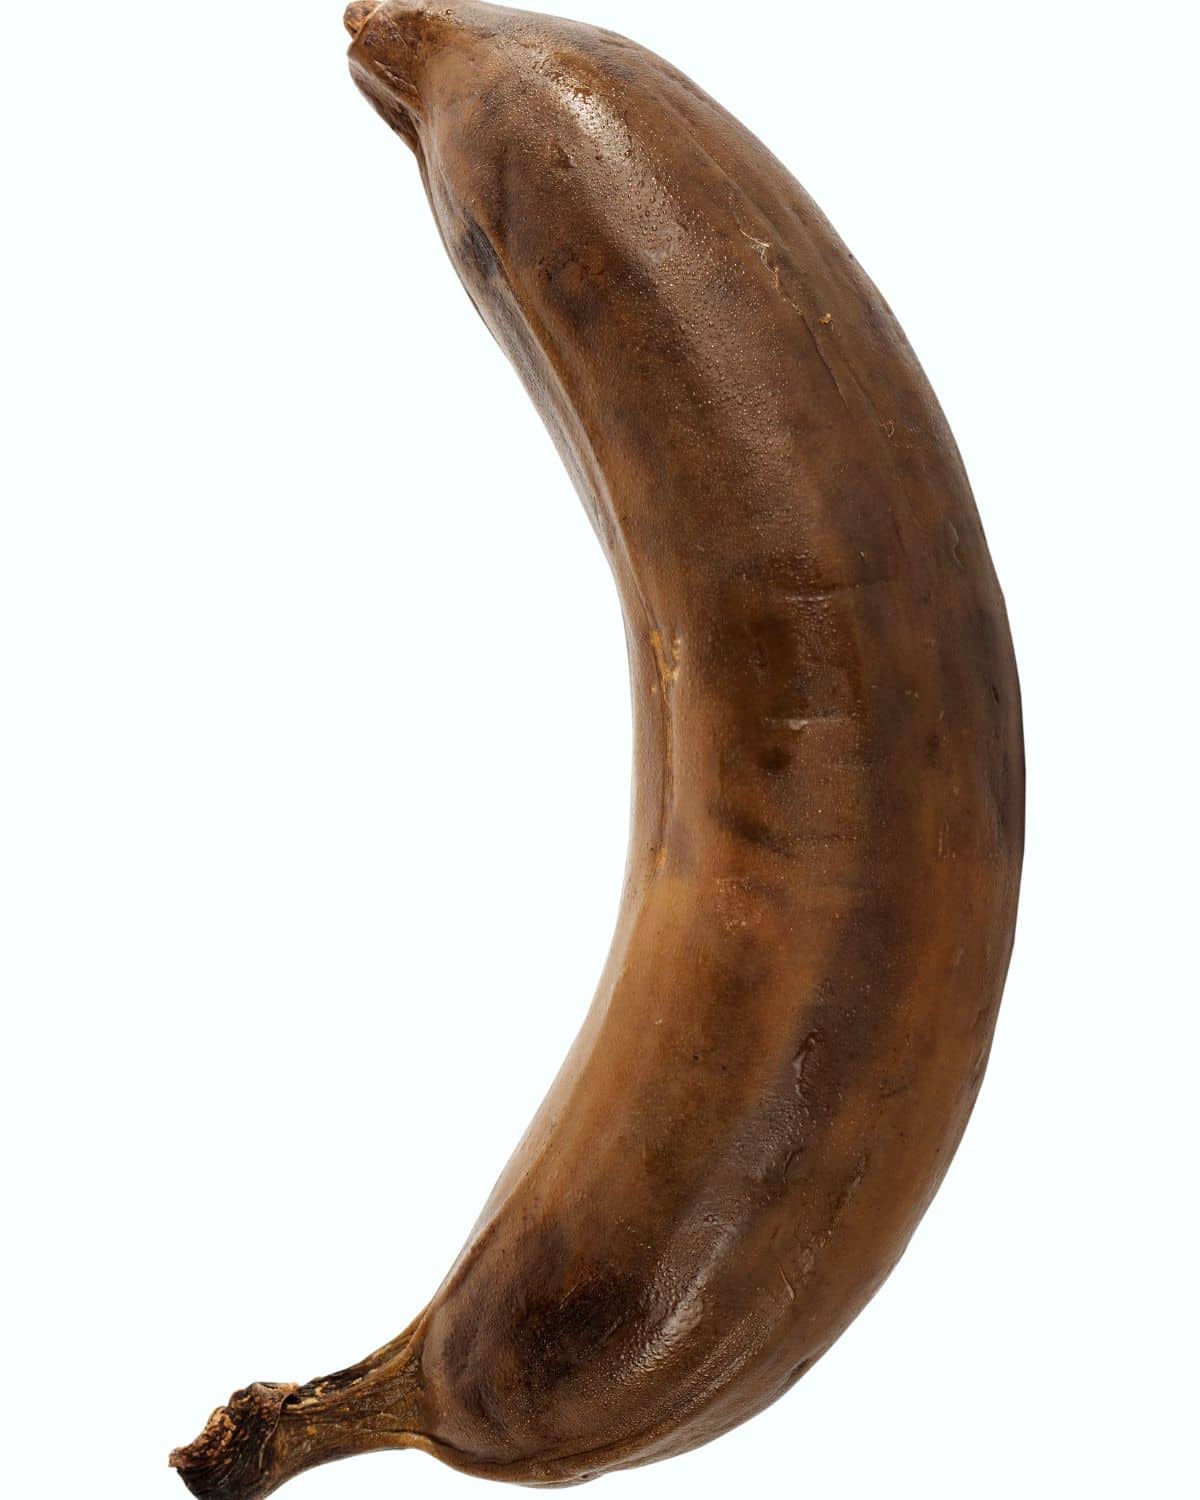 A brown banana that's been frozen and thawed.